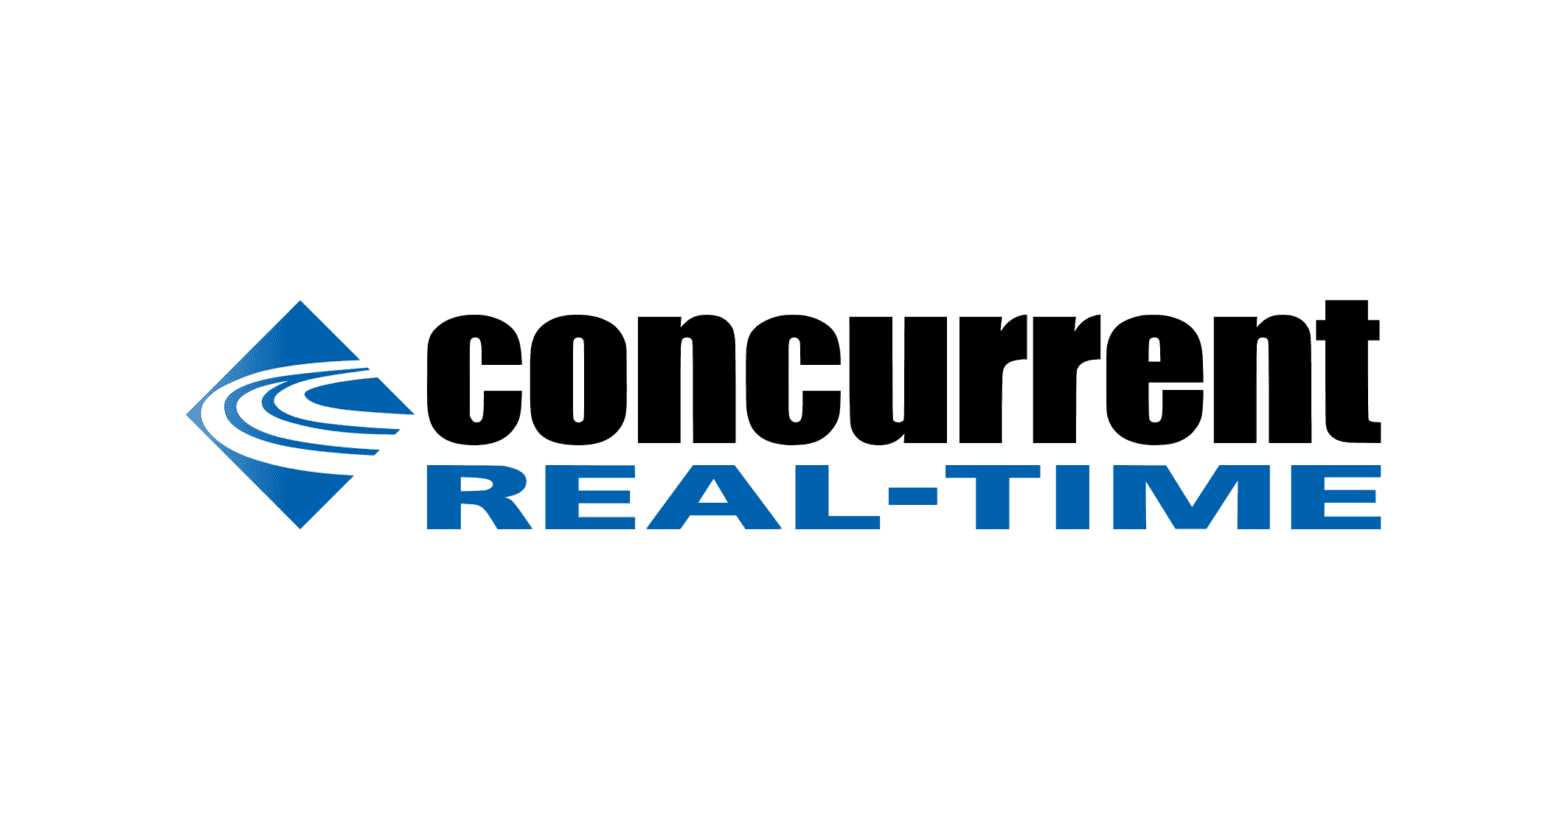 Concurrent Real-Time